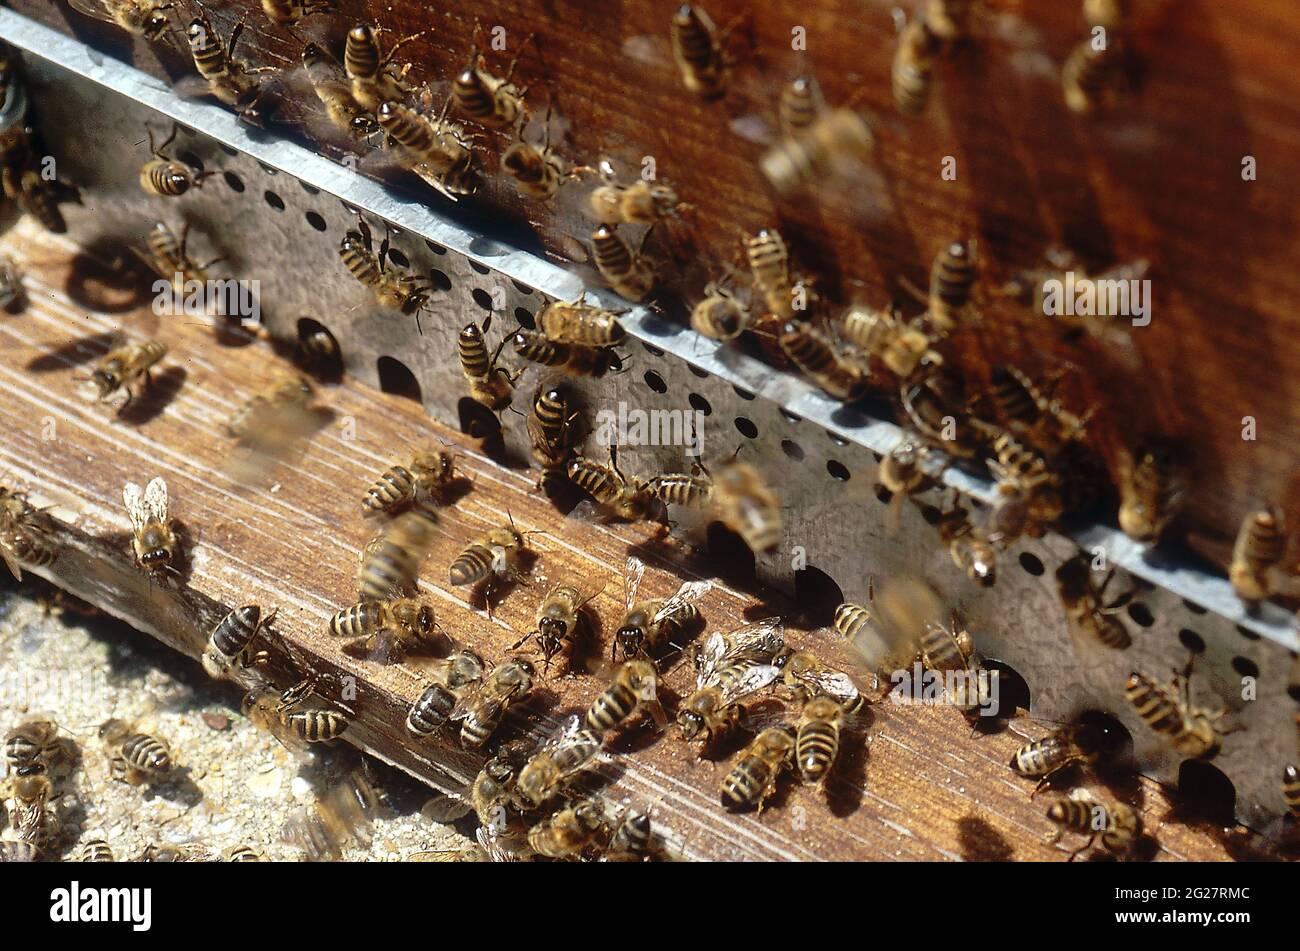 FRANCE. PAS-DE-CALAIS (62). HAUTS-DE-FRANCE. BEEKEEPING. BALLET OF BEES IN FRONT OF THE ENTRANCE TO THEIR HIVE Stock Photo